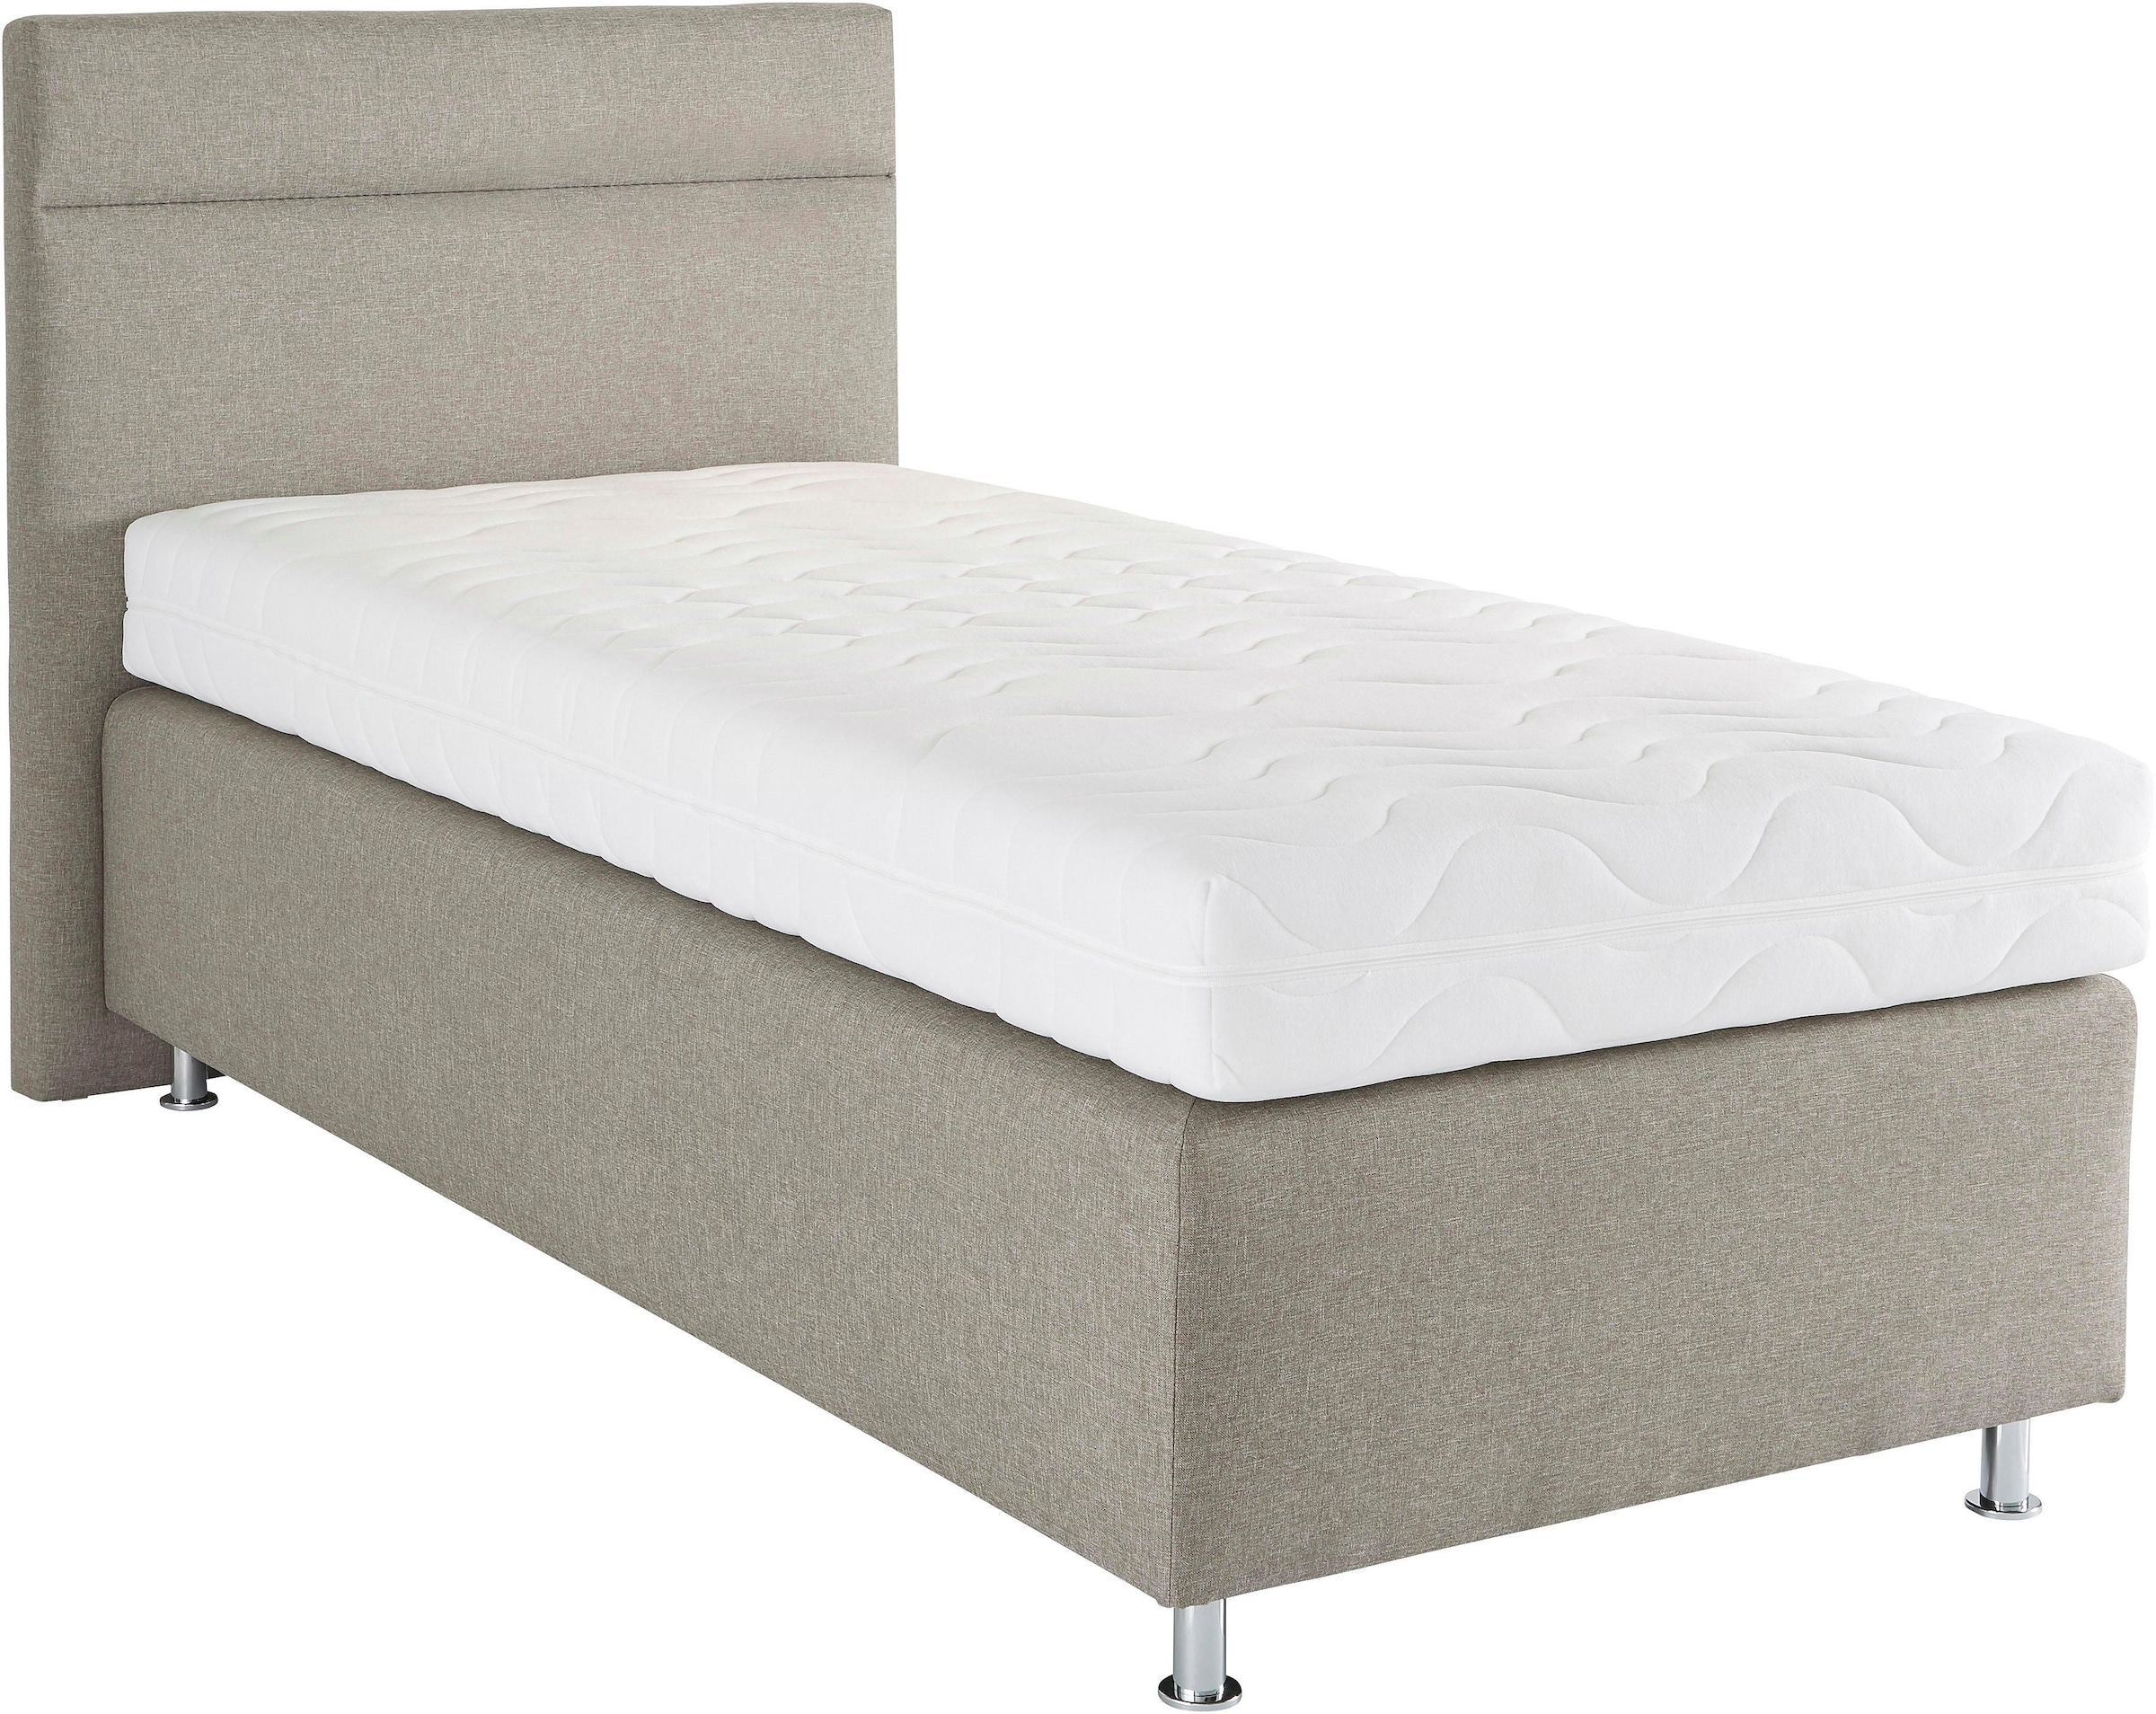 Boxspringbett, wahlweise mit LED-Beleuchtung